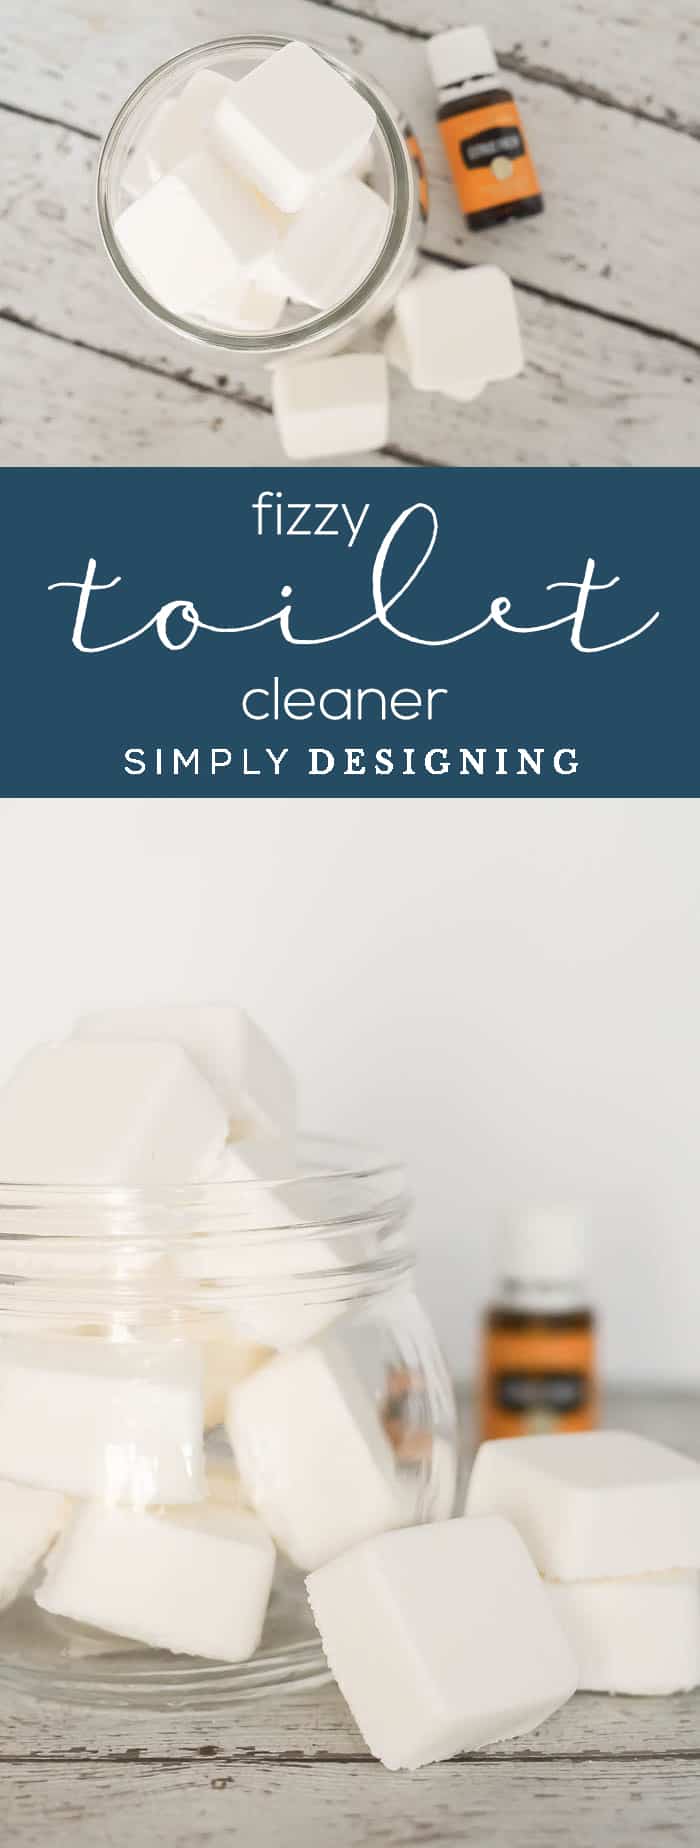 Fizzy Homemade Toilet Cleaner - this essential oil toilet cleaner is a wonderful alternative - fizzy - fizzy toilet bombs